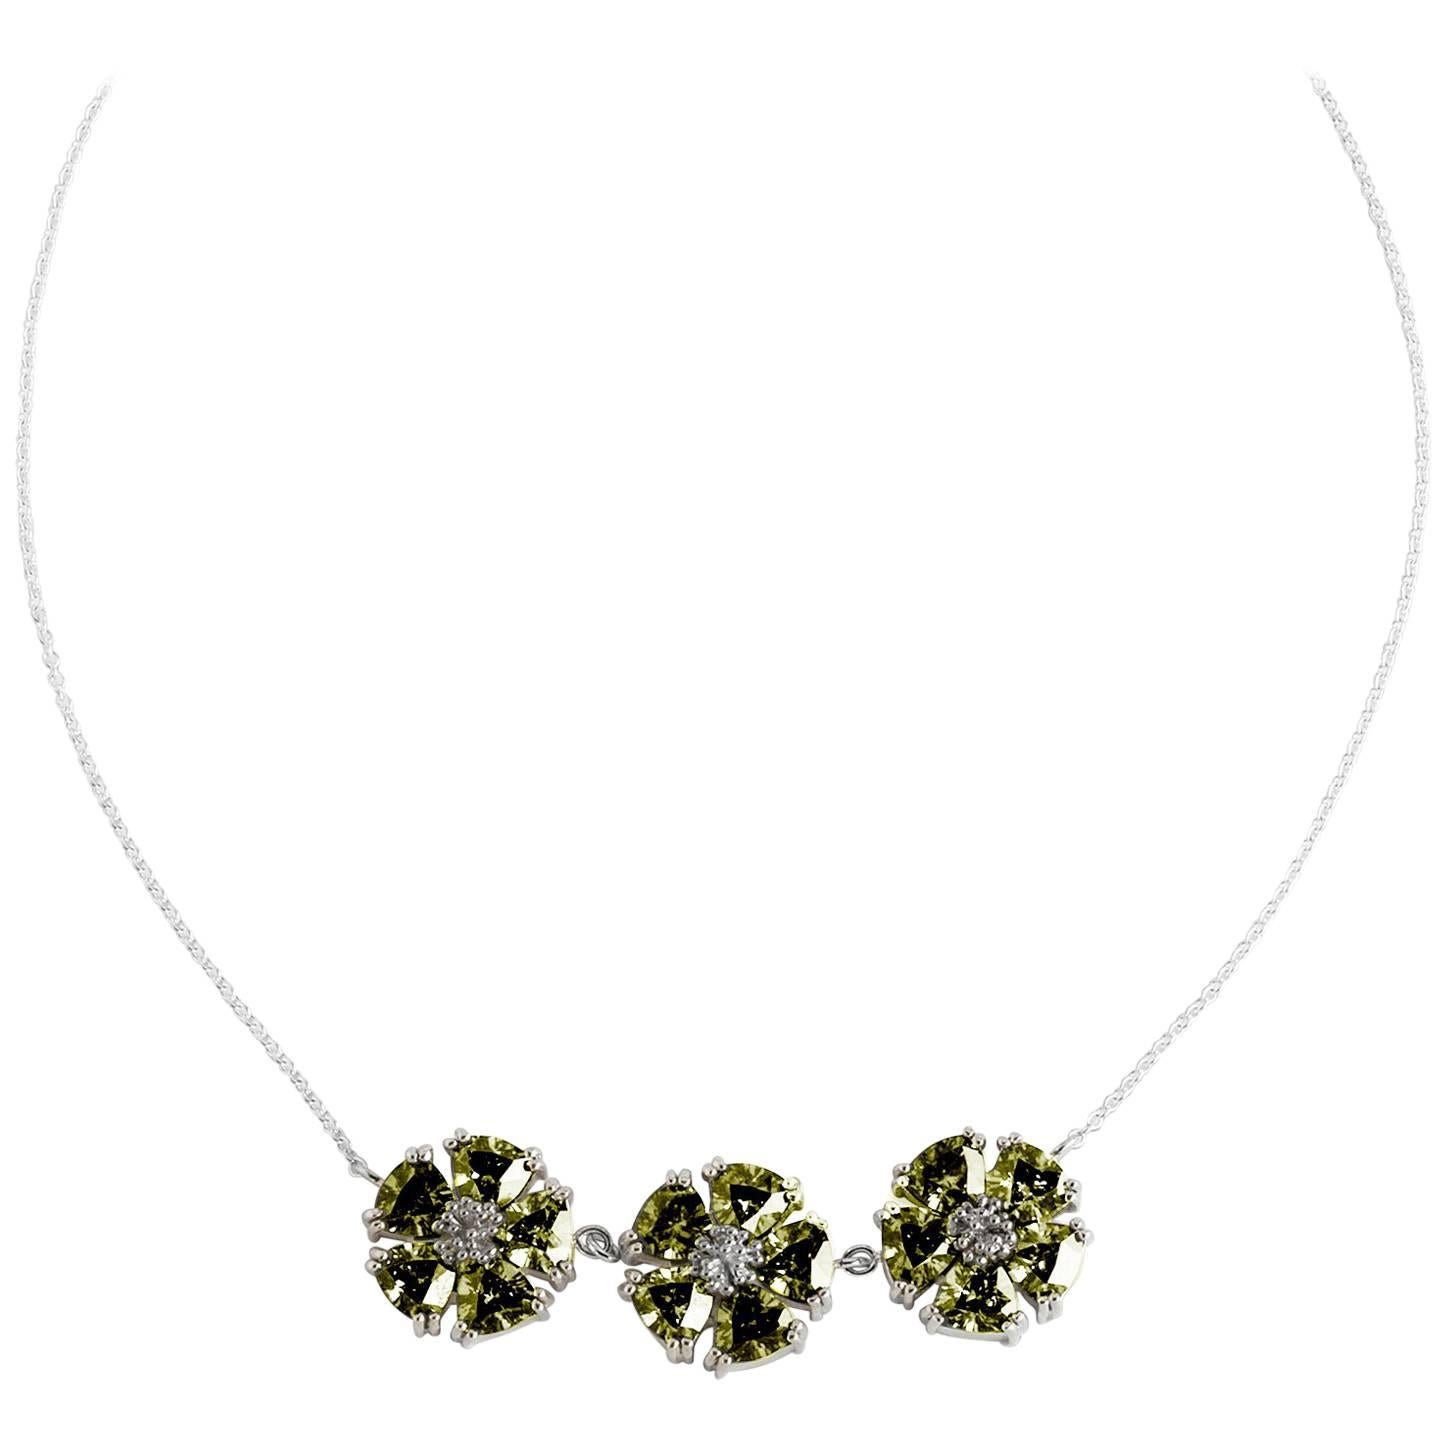 Olive Peridot 123 Blossom Stone Necklace For Sale